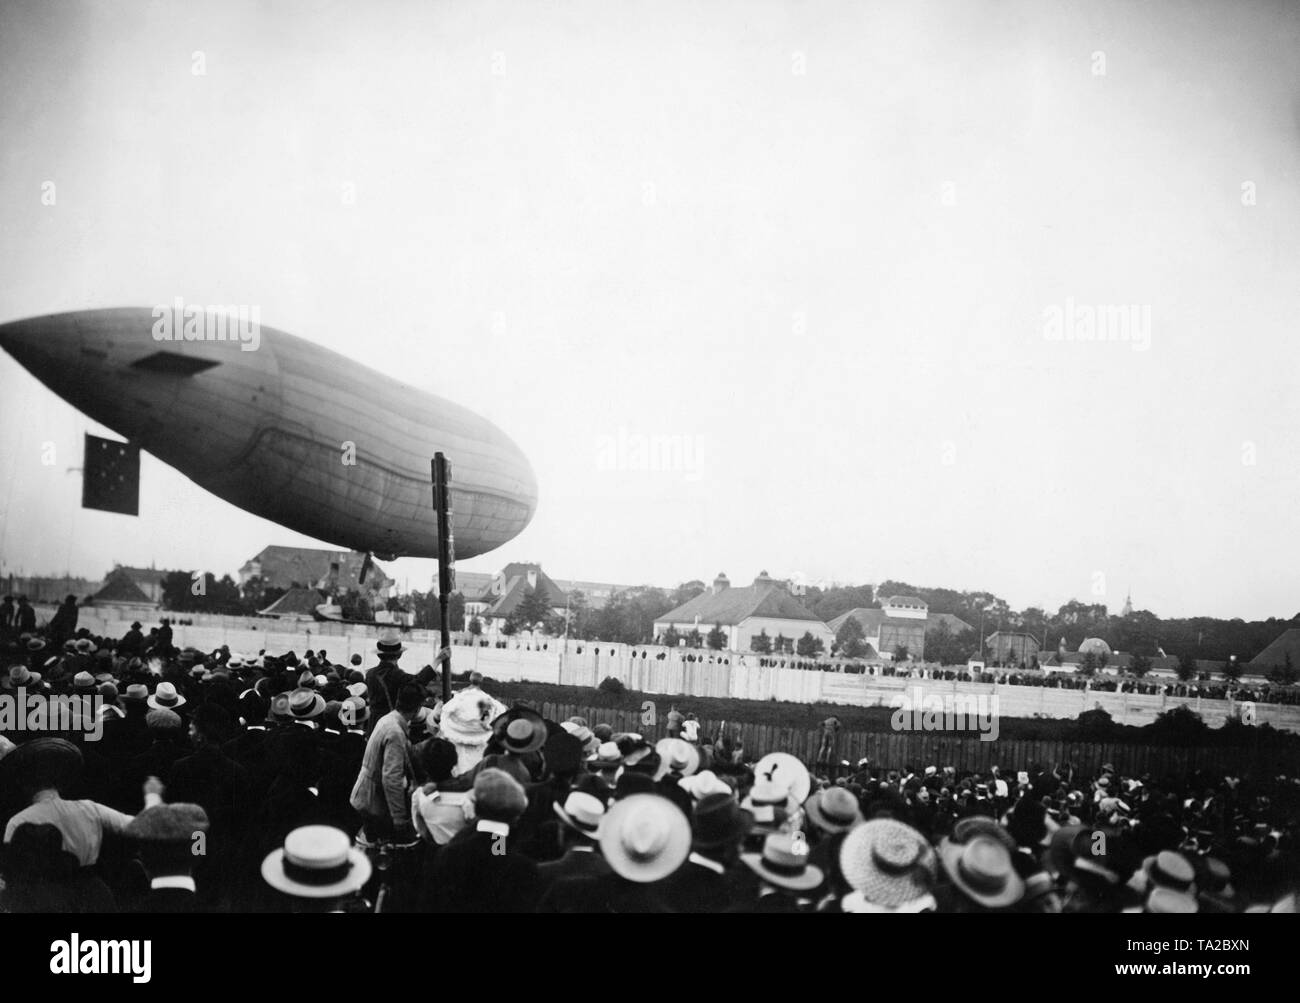 The Parseval III has landed on the Oberwiesenfeld airfield while being watched by a large crowd. The non-rigid airship is for the first time in Munich. Stock Photo